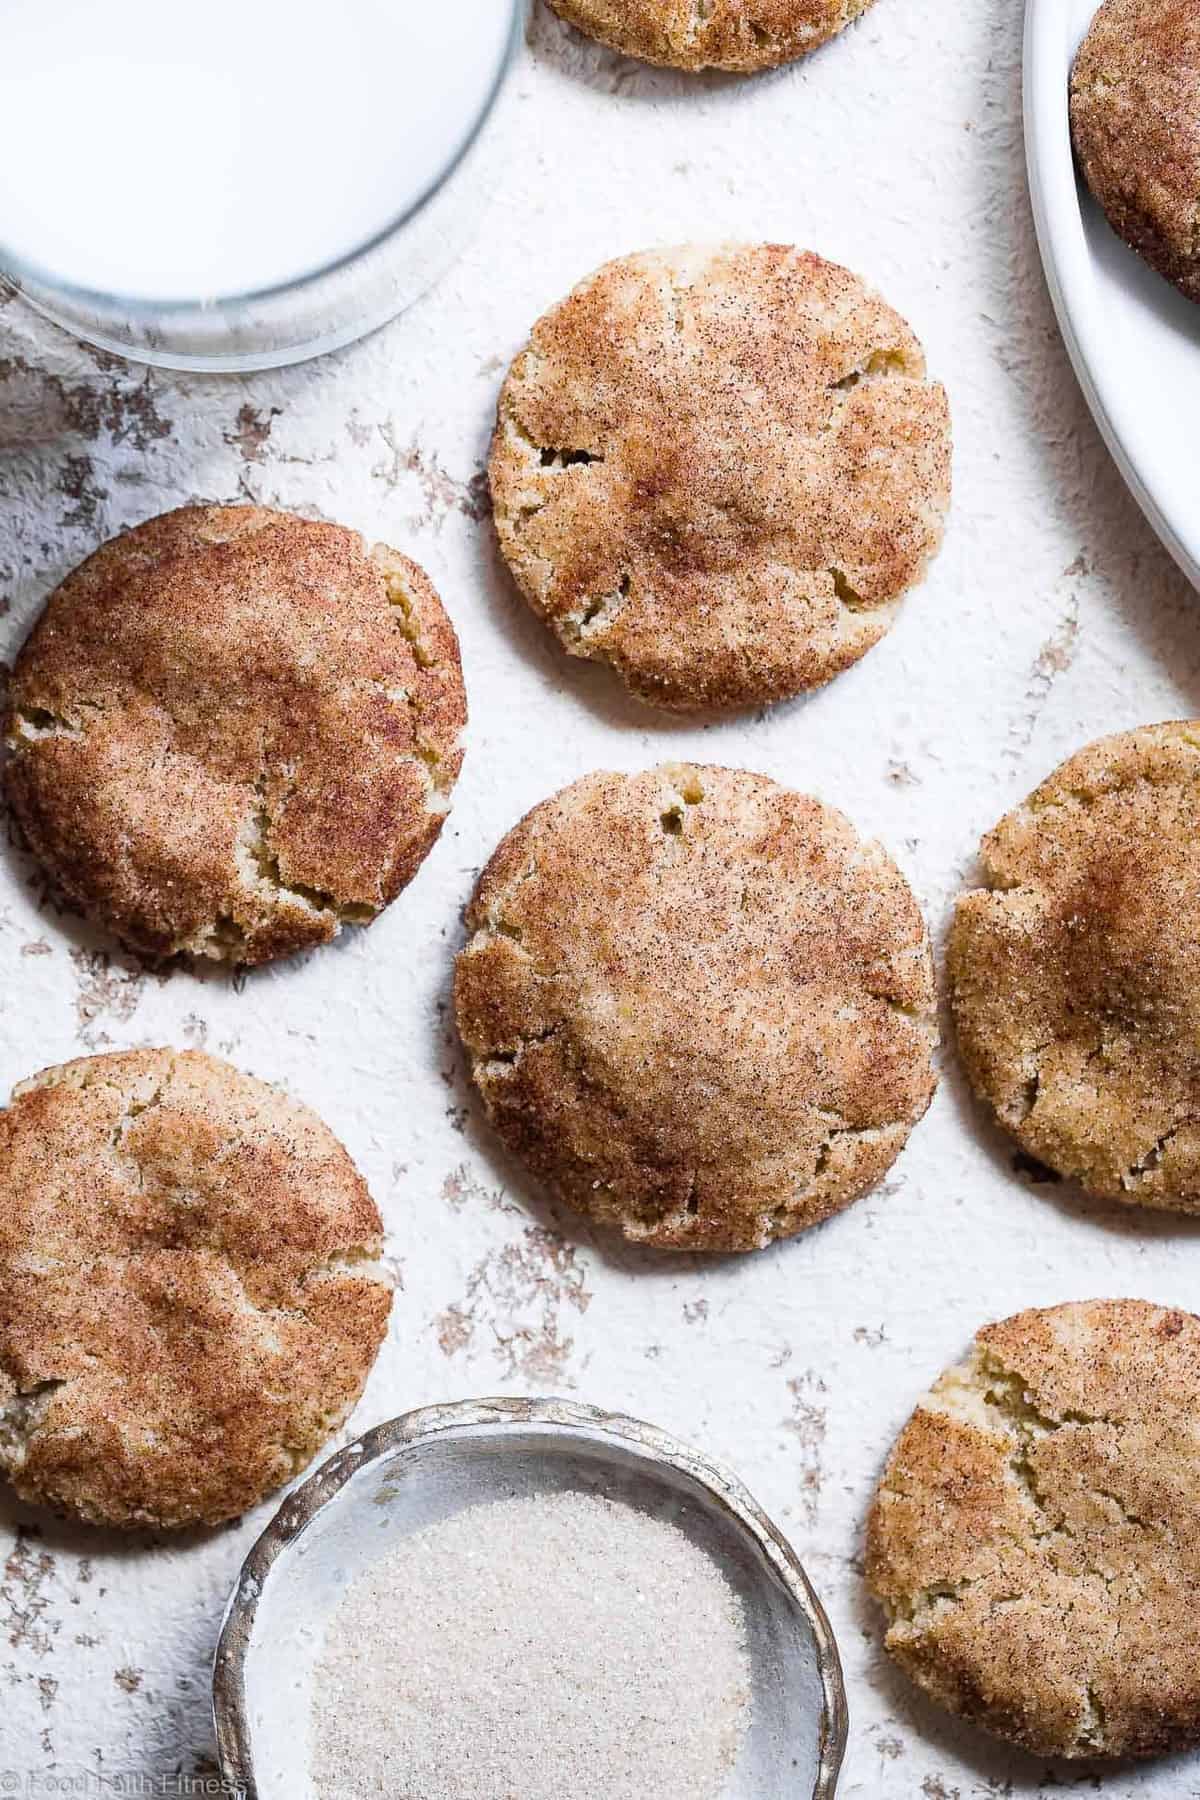 Gluten Free Vegan Snickerdoodles - These EASY, egg, dairy and gluten free snickerdoodles are perfectly soft, chewy and spicy-sweet! Made from simple, pantry-essential ingredients, only 120 calories and SO tasty! | Foodfaithfitness | #Glutenfree #Vegan #Healthy #Dairyfree #Eggfree